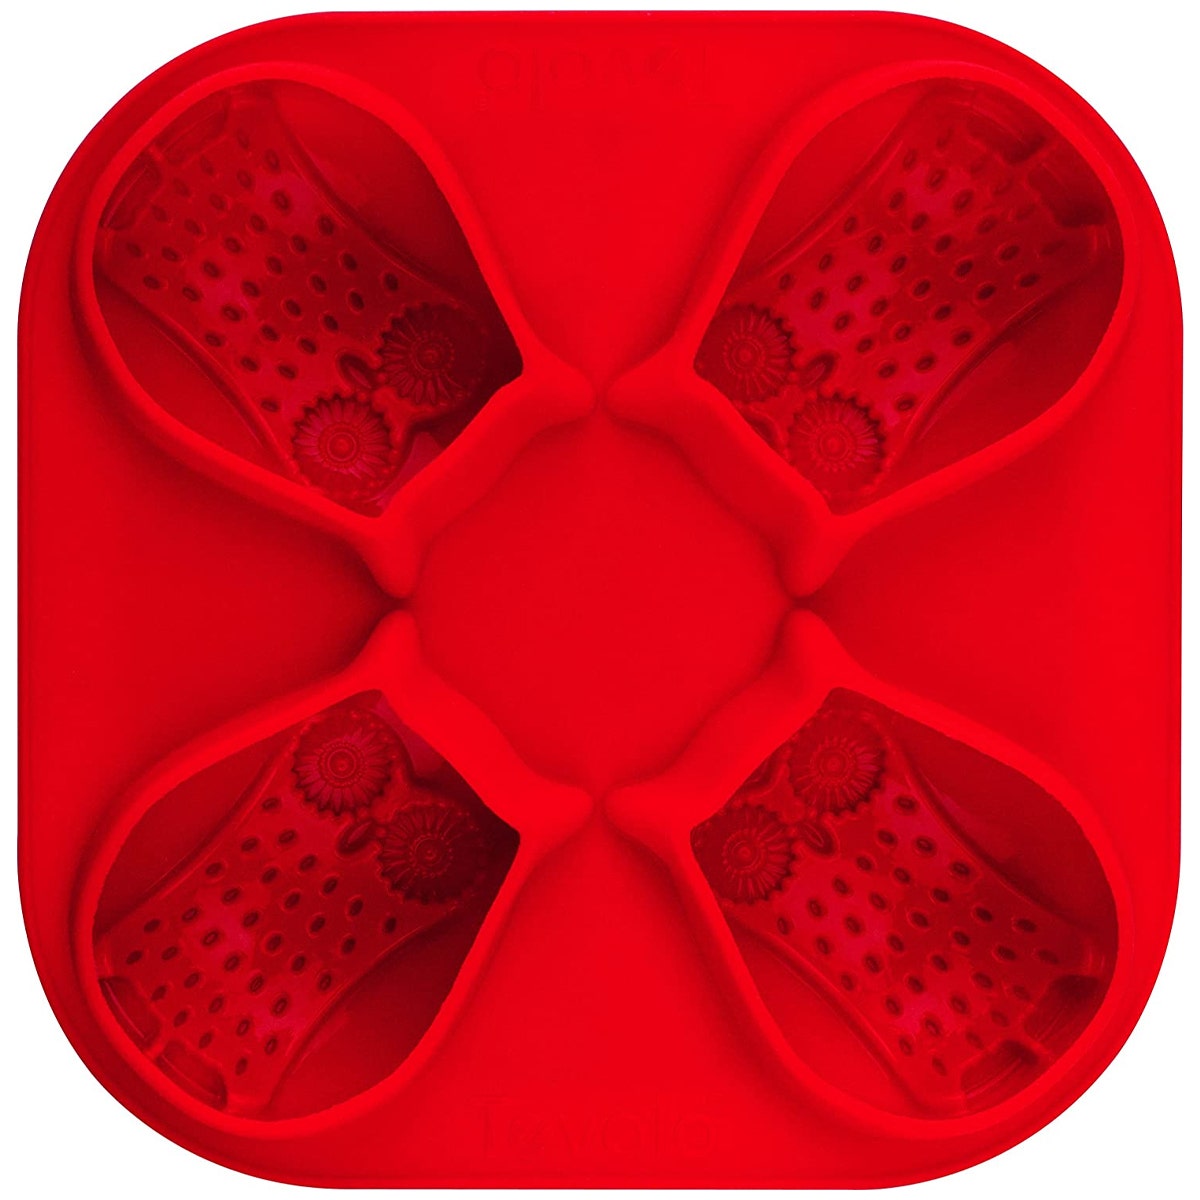 Tovolo Owls Silicon Ice Mold – Cool In Cocktails And Other Drinks